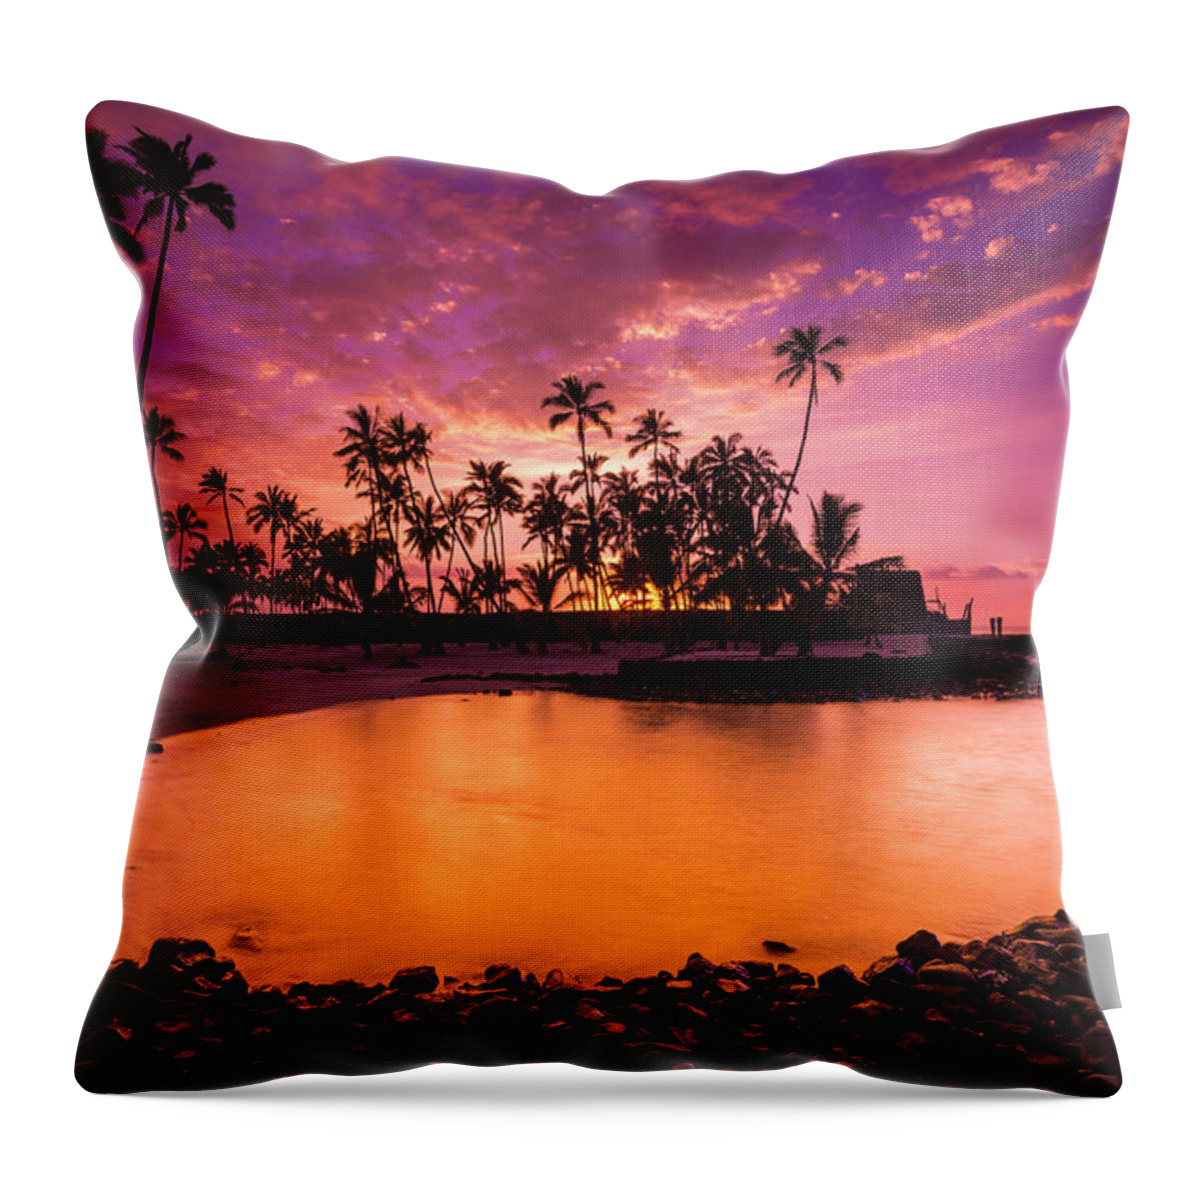 Russ Bishop Hawaii Throw Pillow featuring the photograph Sacred City by Russ Bishop